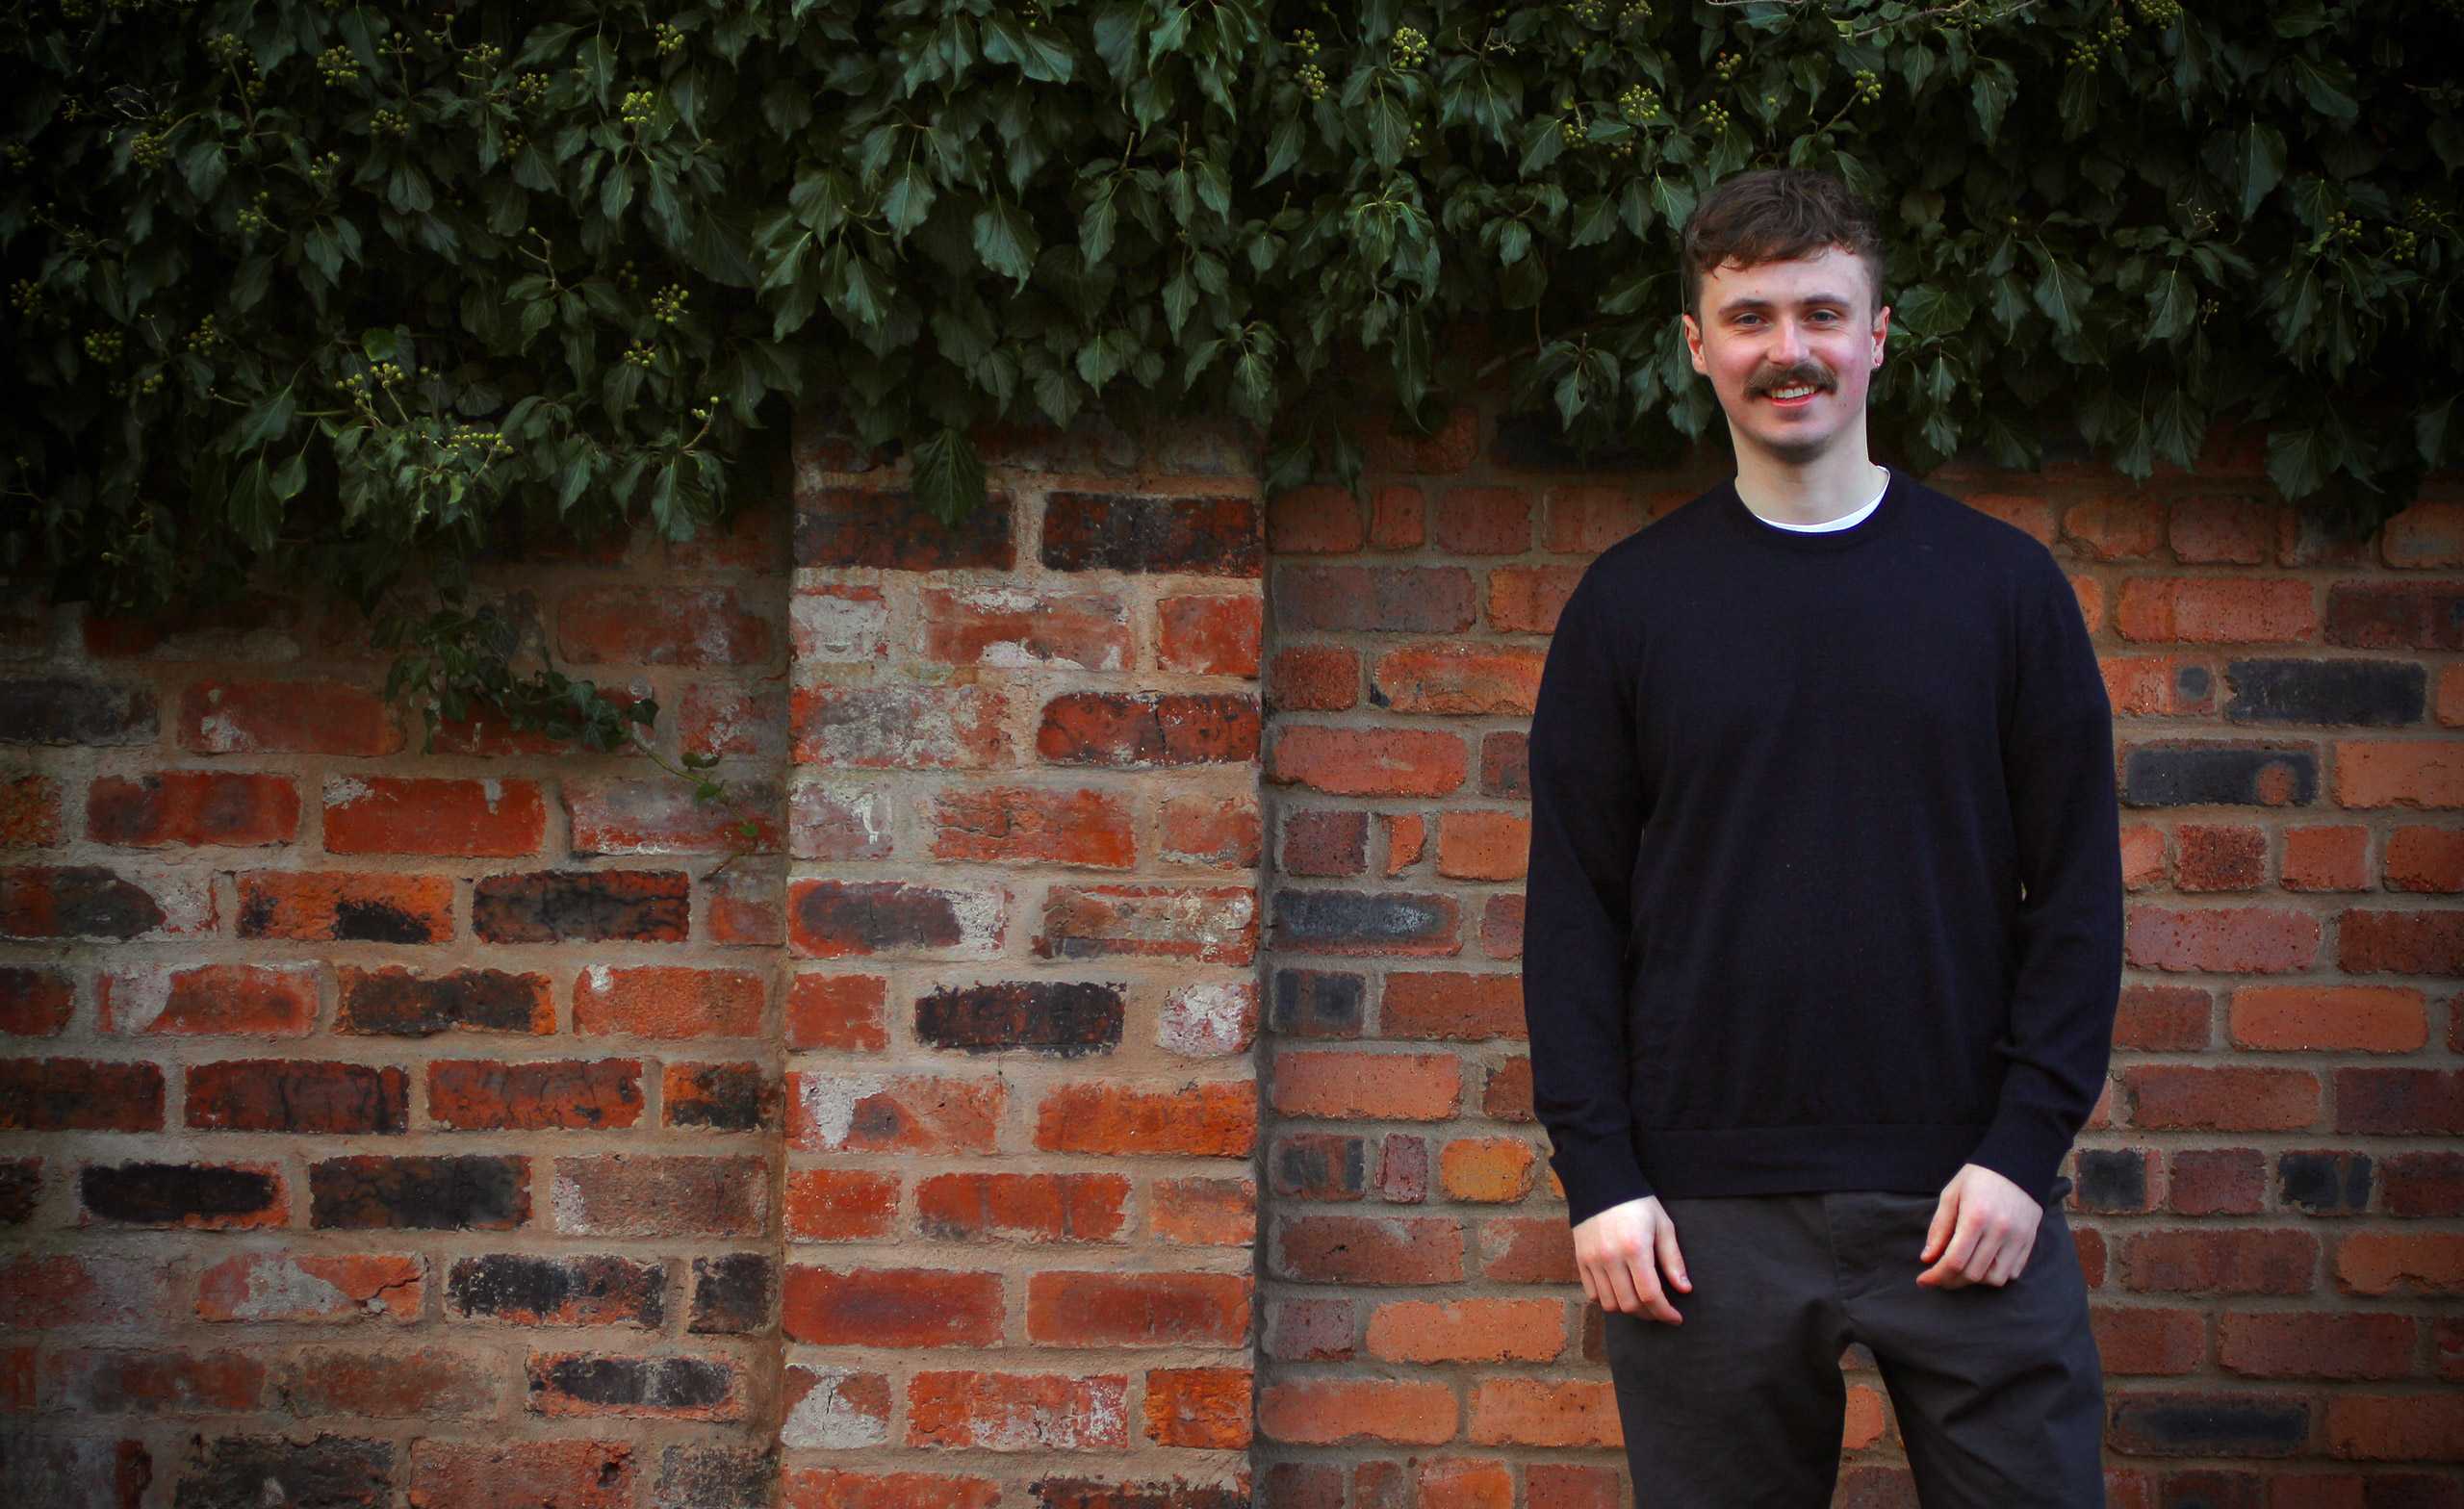 Toby Lyons wearing a sweater stood in front of a brick wall